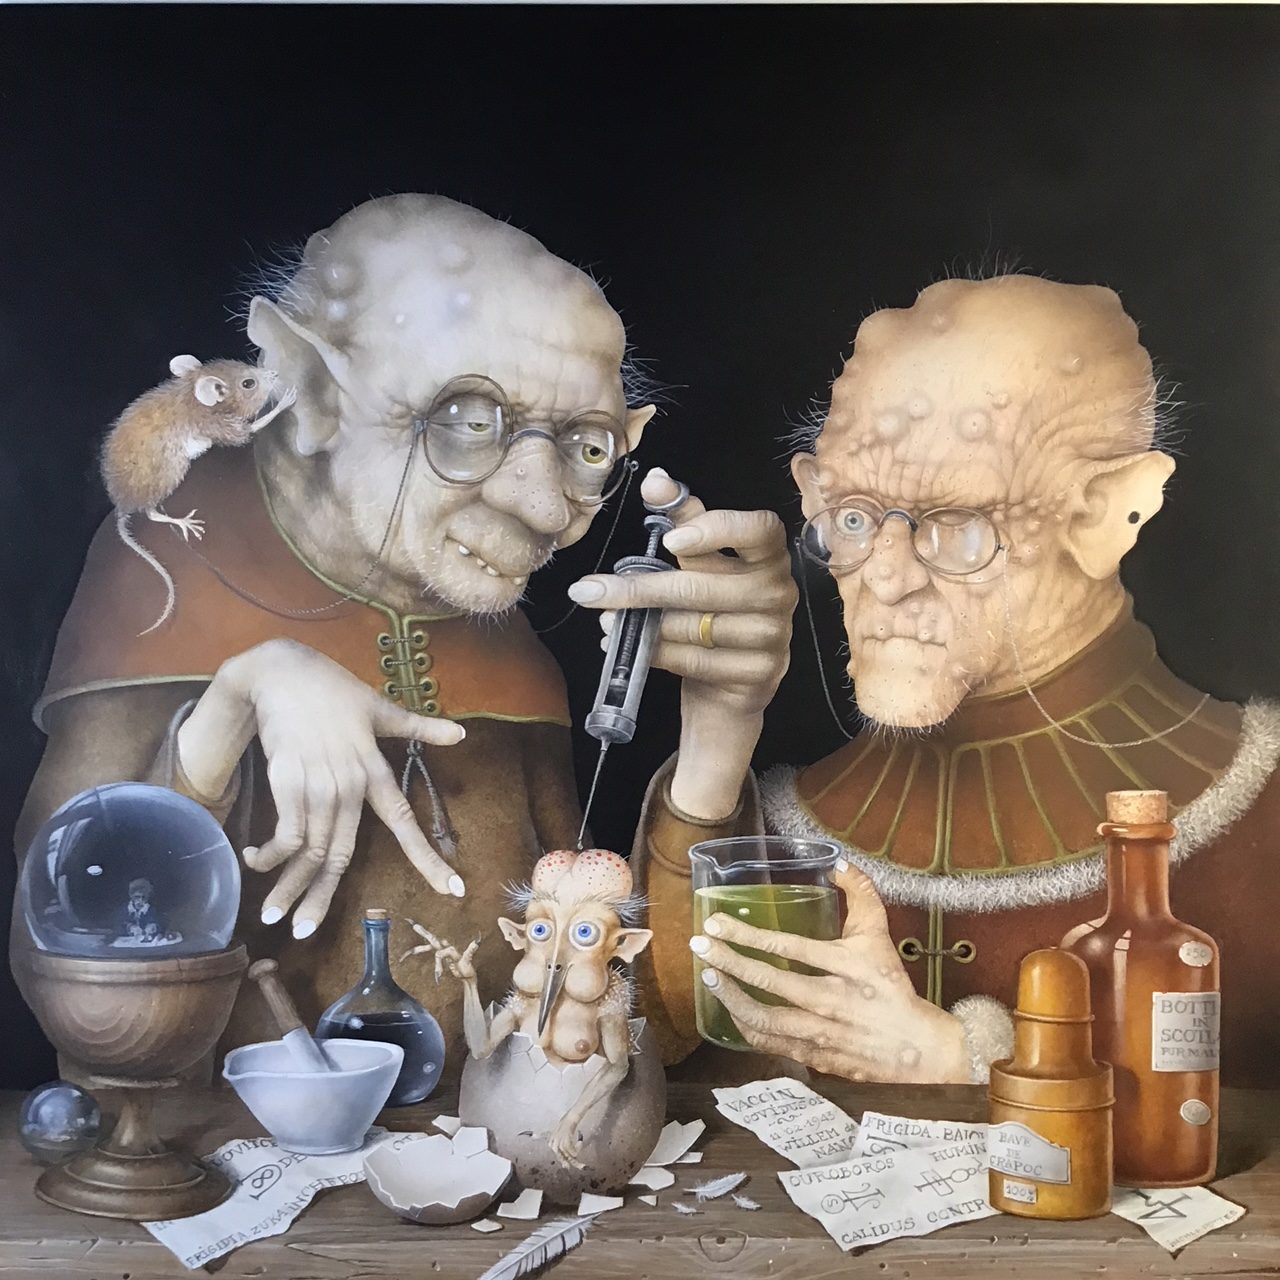 The two scientists